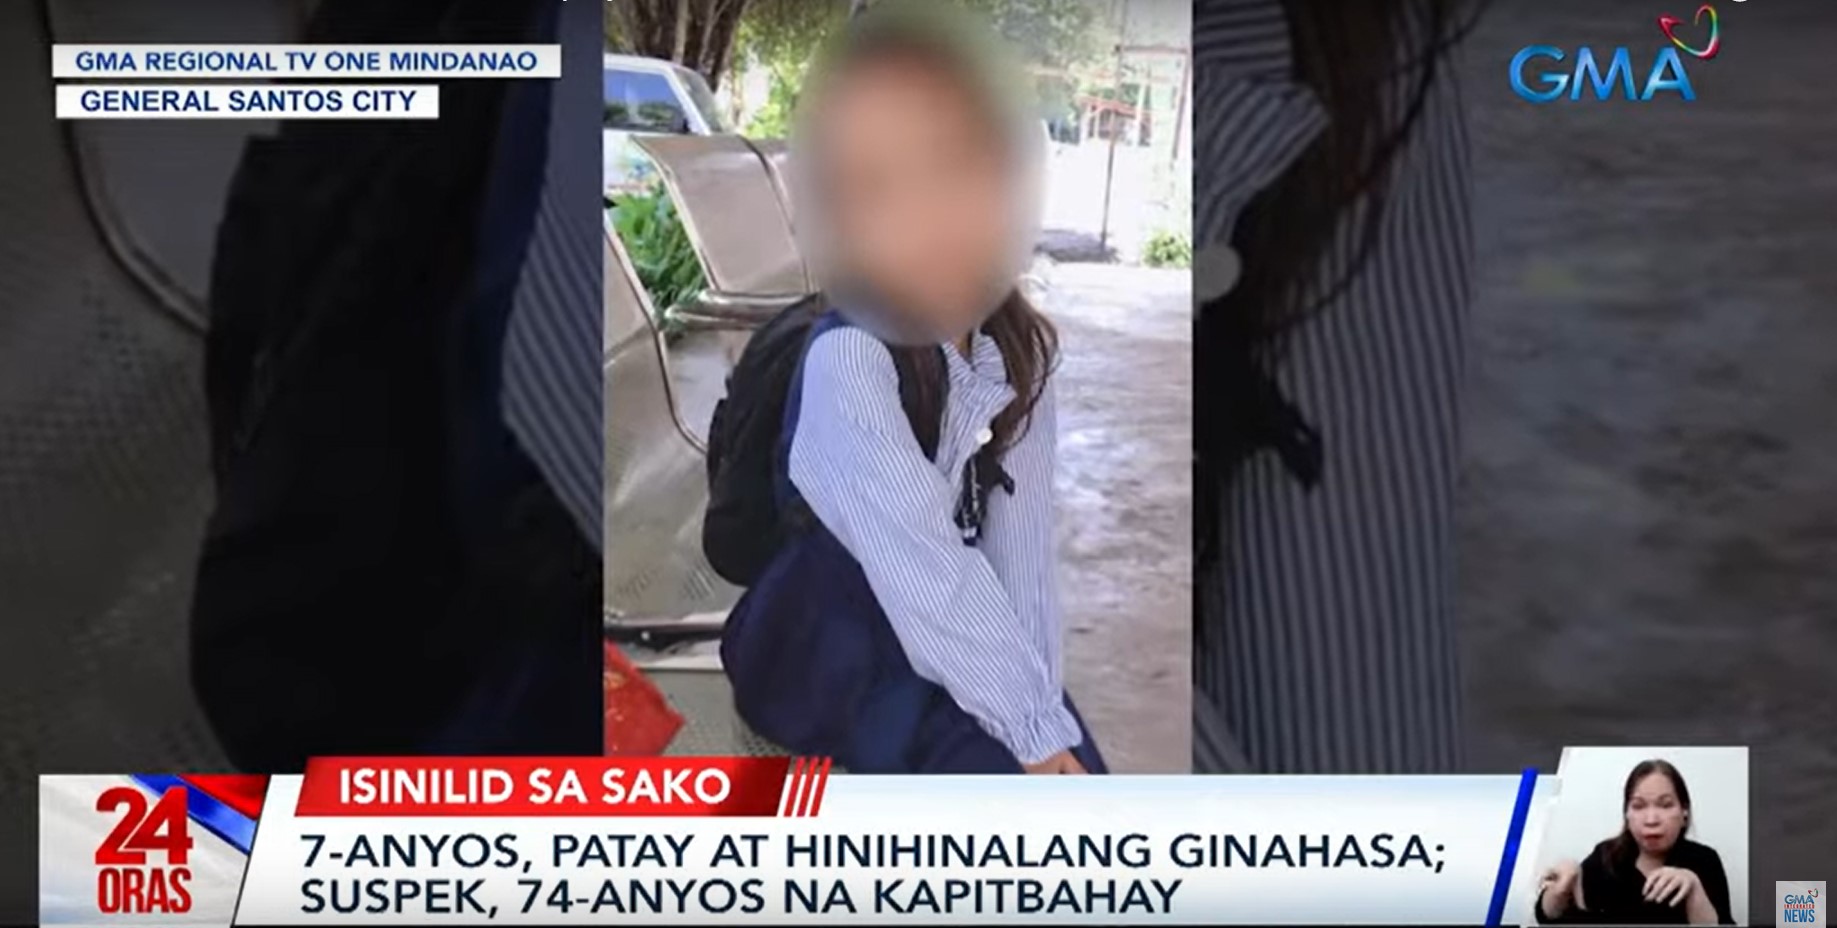 Body of missing 7-year old girl in GenSan found in sack, police tag 74-year old neighbor as suspect